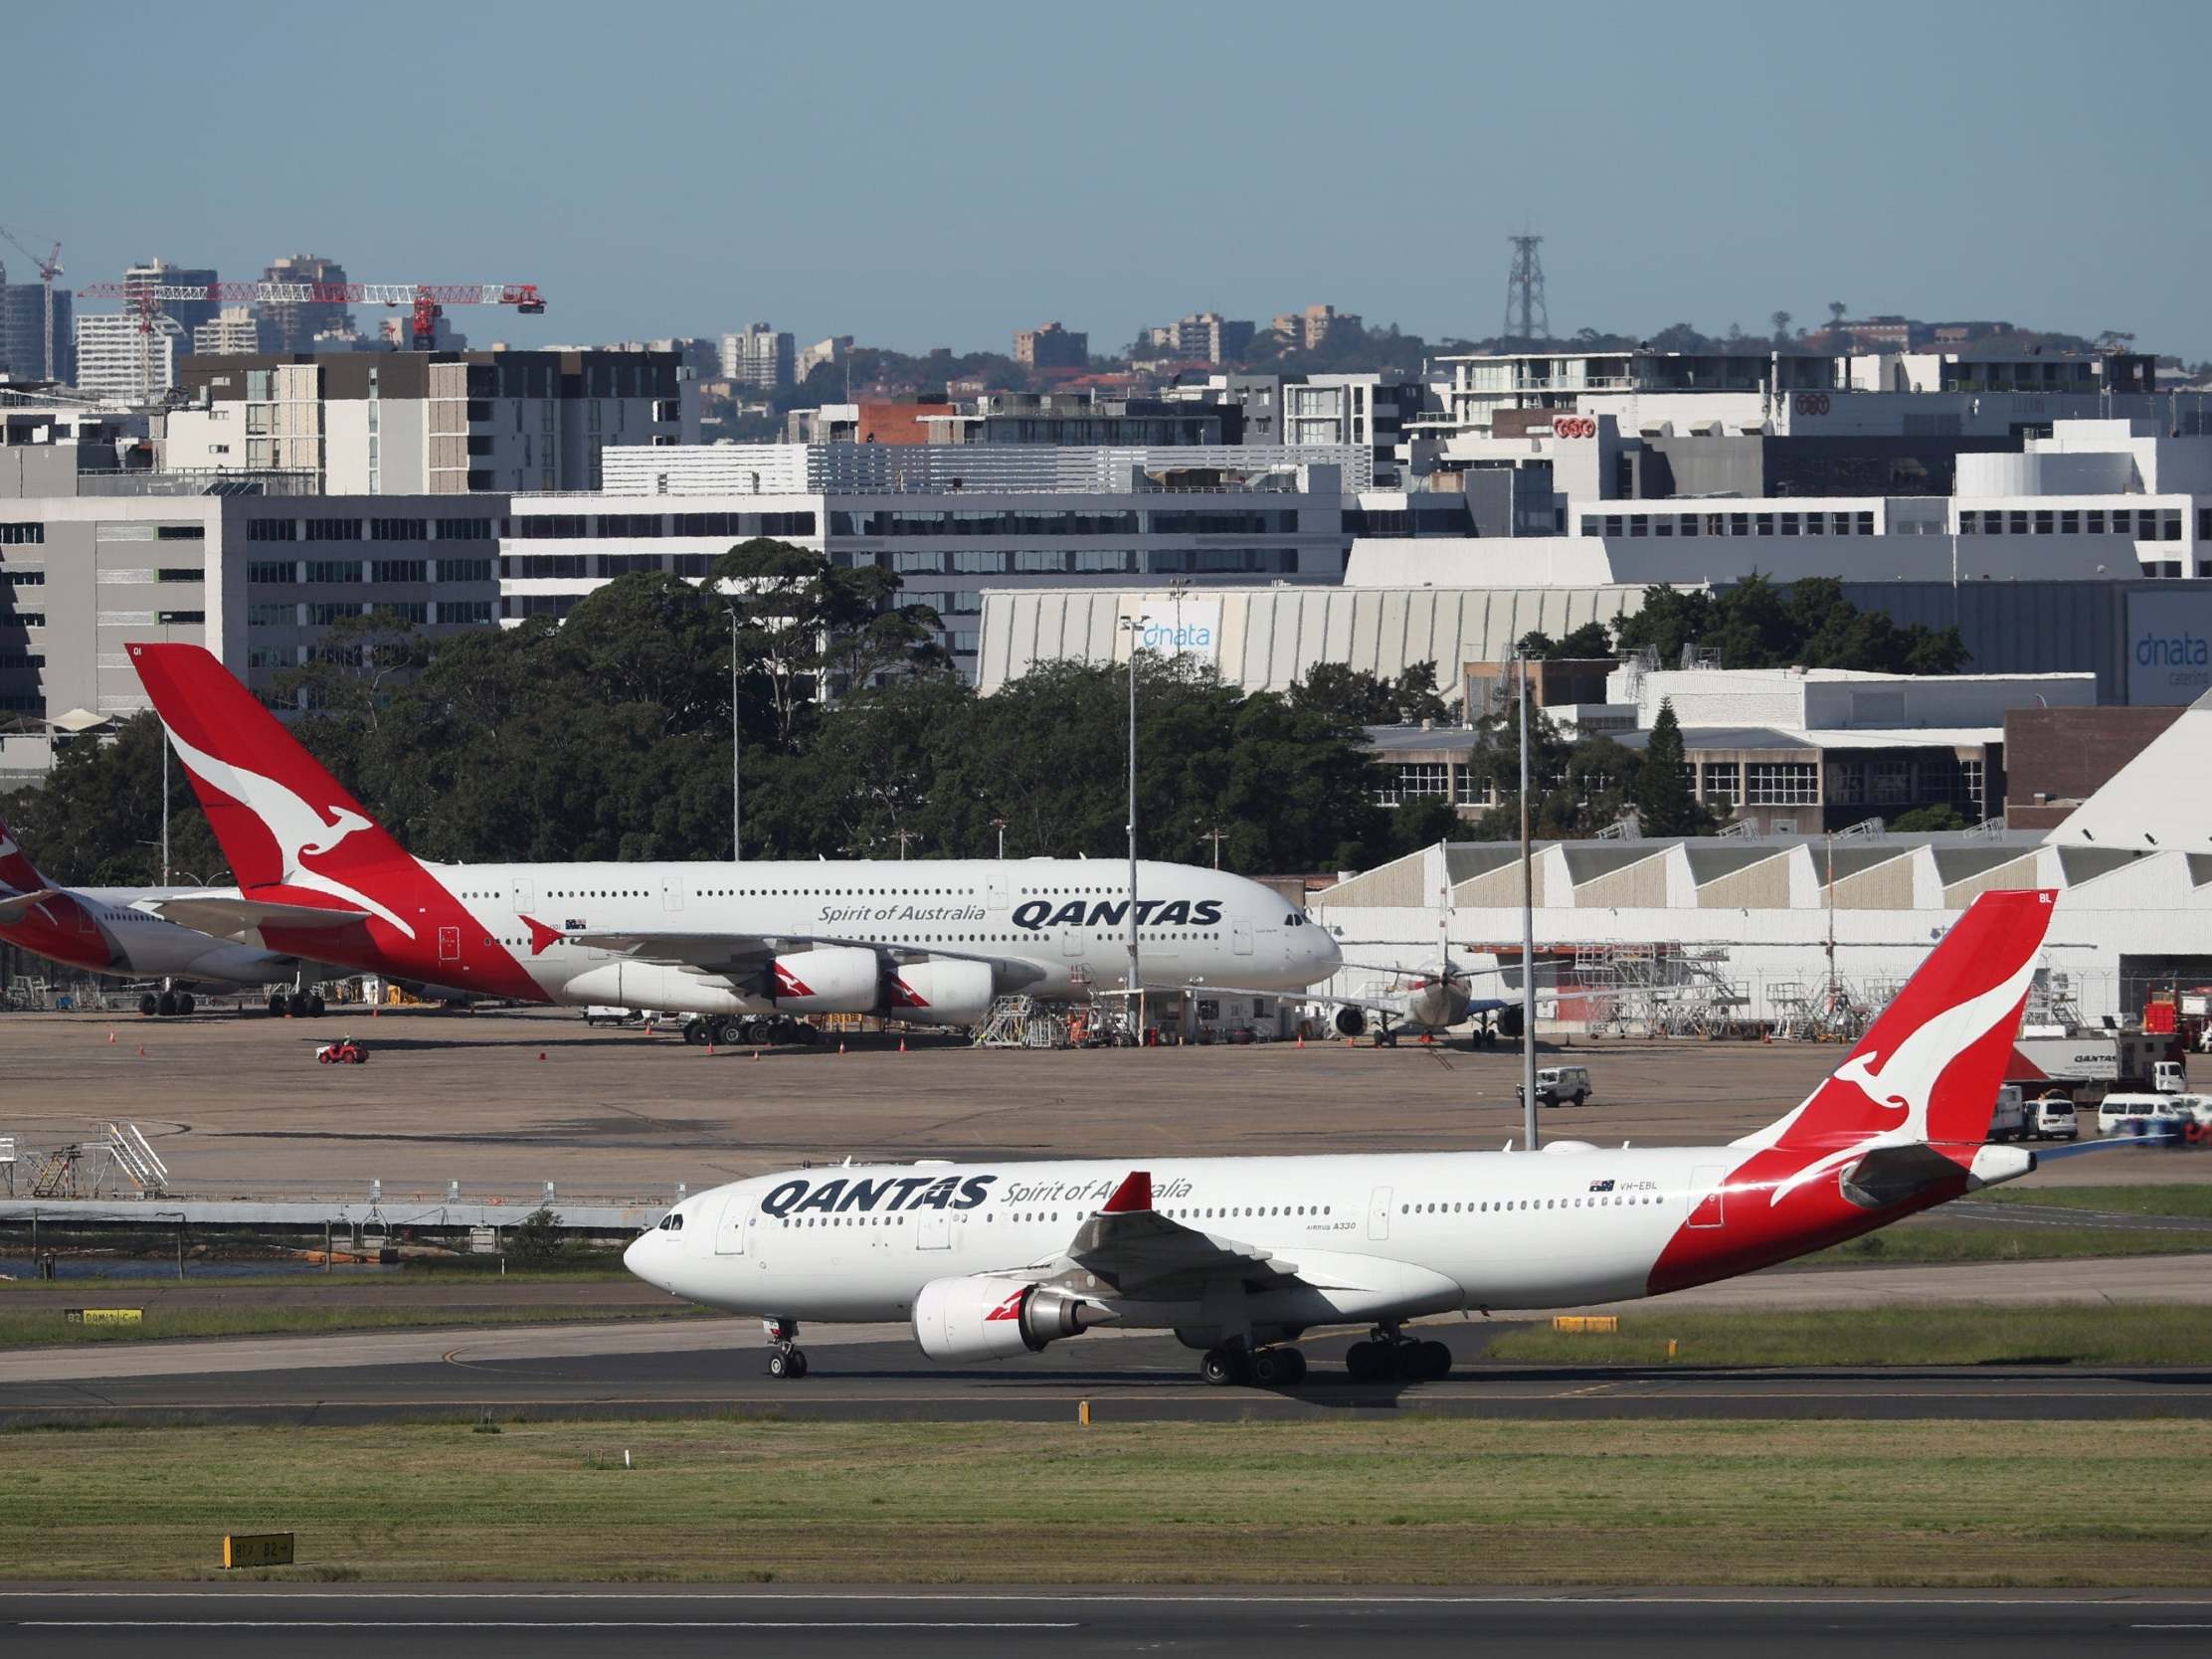 Qantas planes are seen at Kingsford Smith International Airport, following the coronavirus outbreak, in Sydney